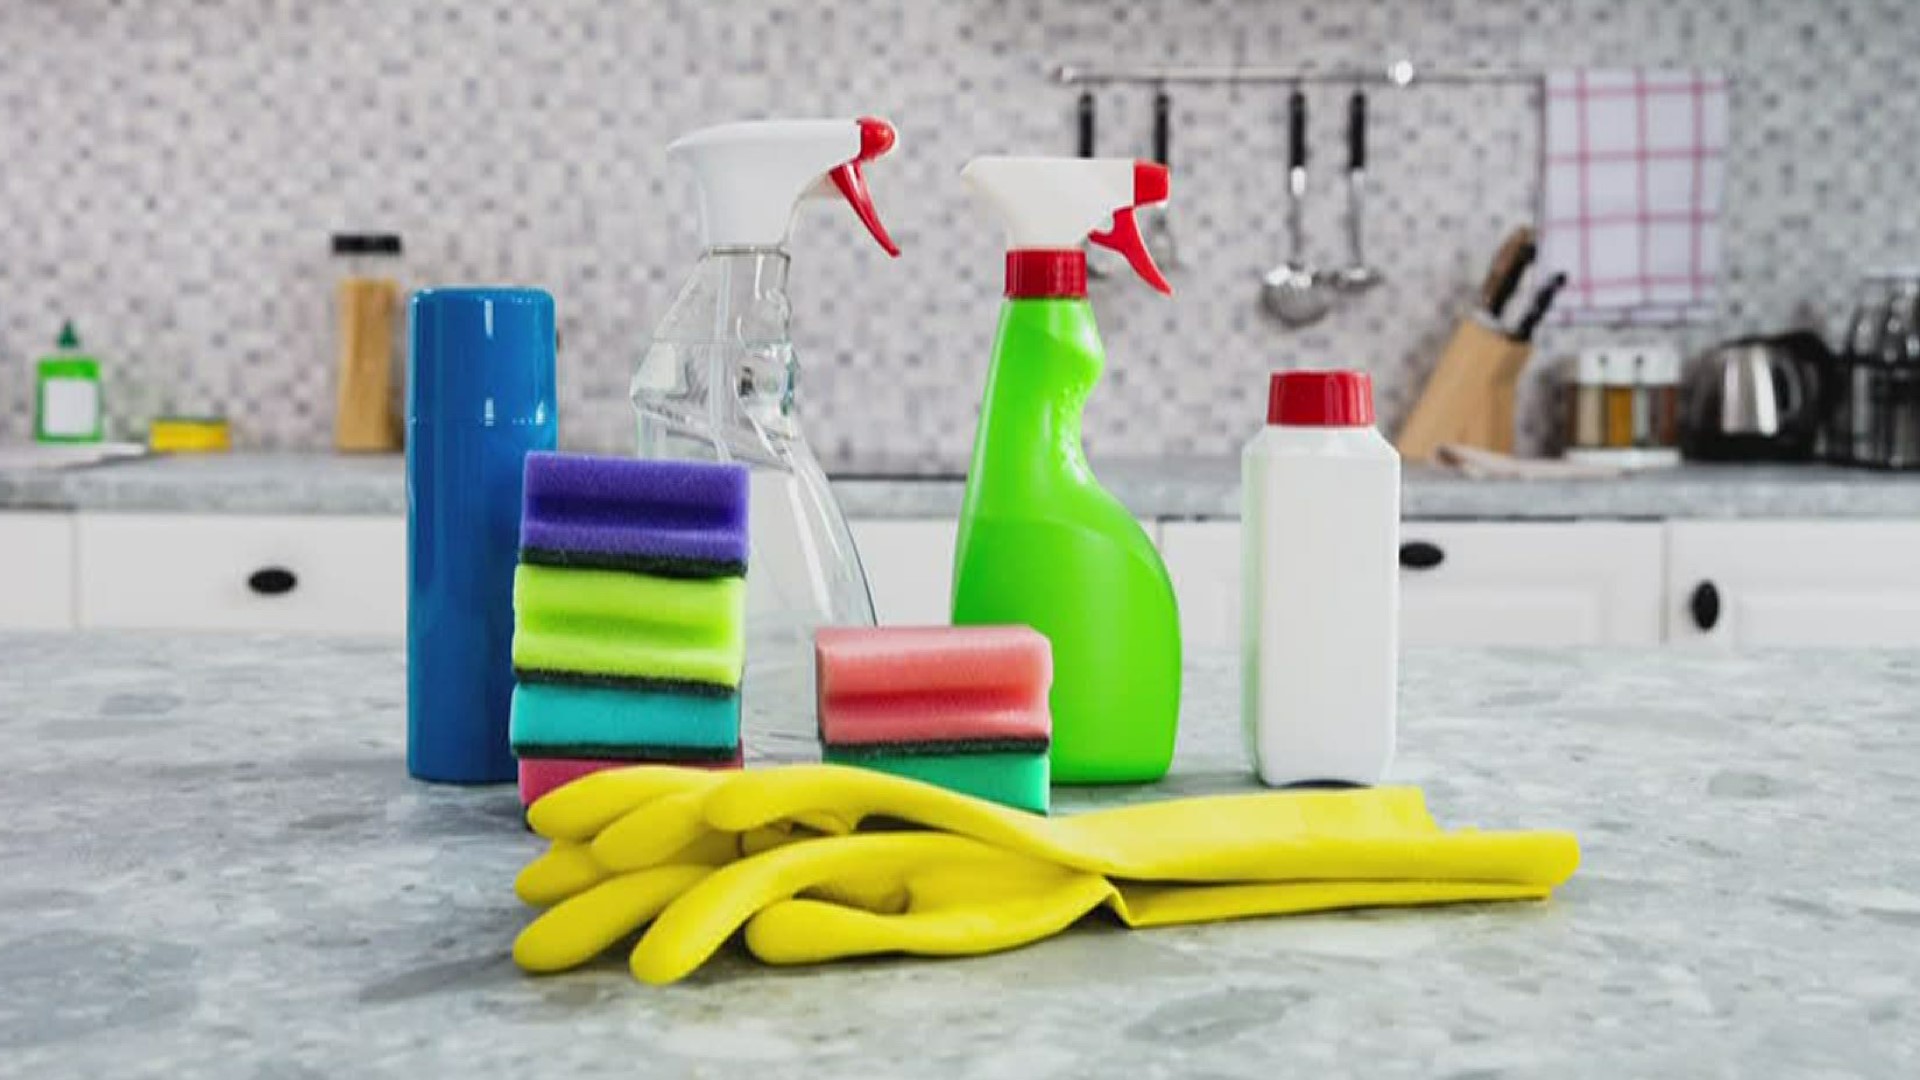 We are cleaning like crazy right now to try and stay healthy. But what are those chemicals doing to our bodies?